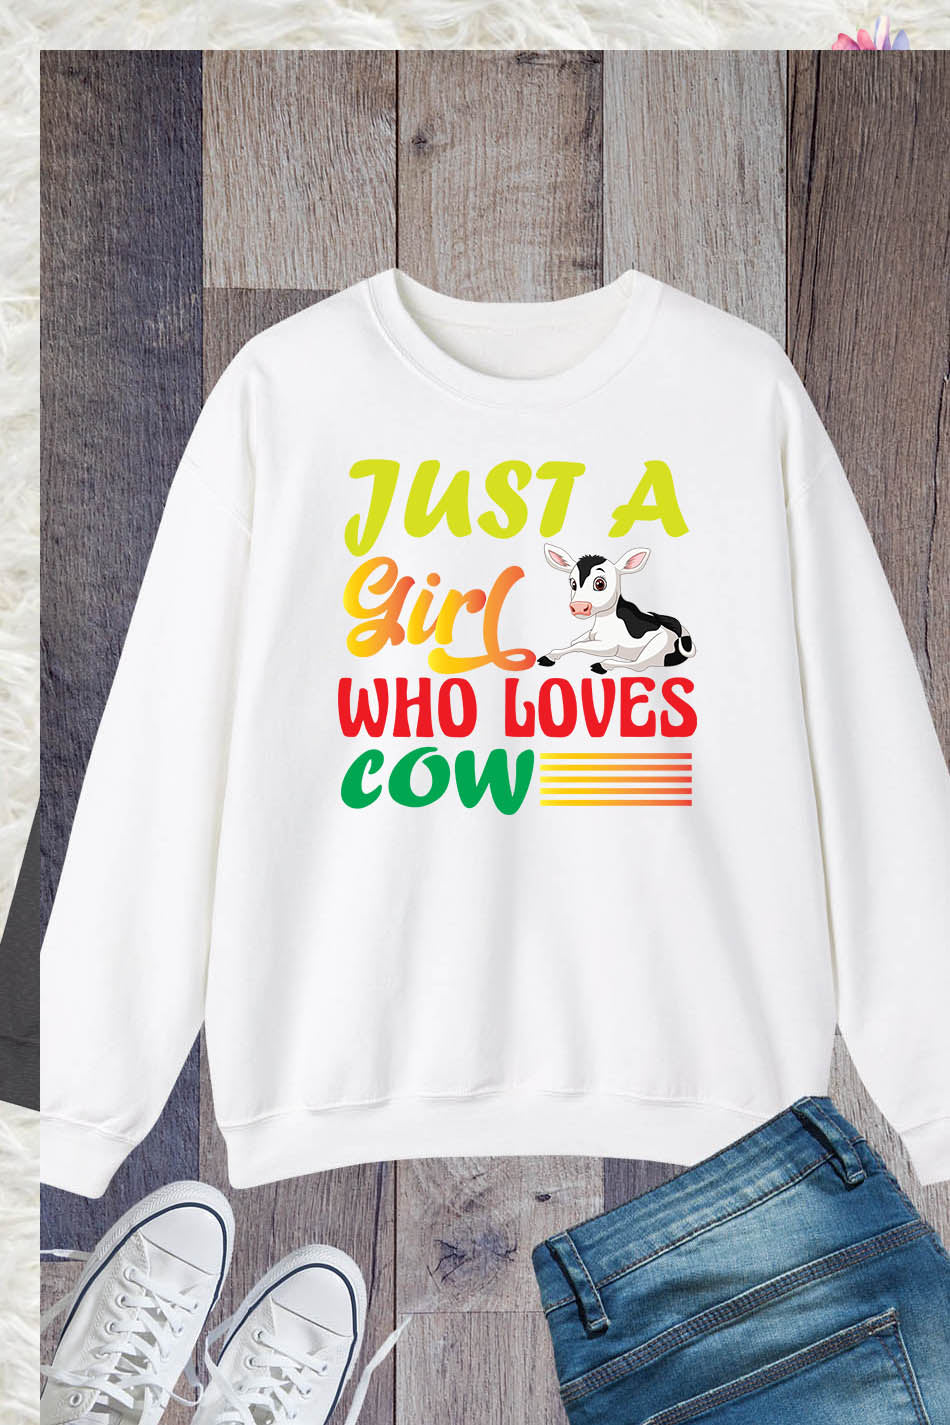 Just a Girl Who Loves Cow Sweatshirt